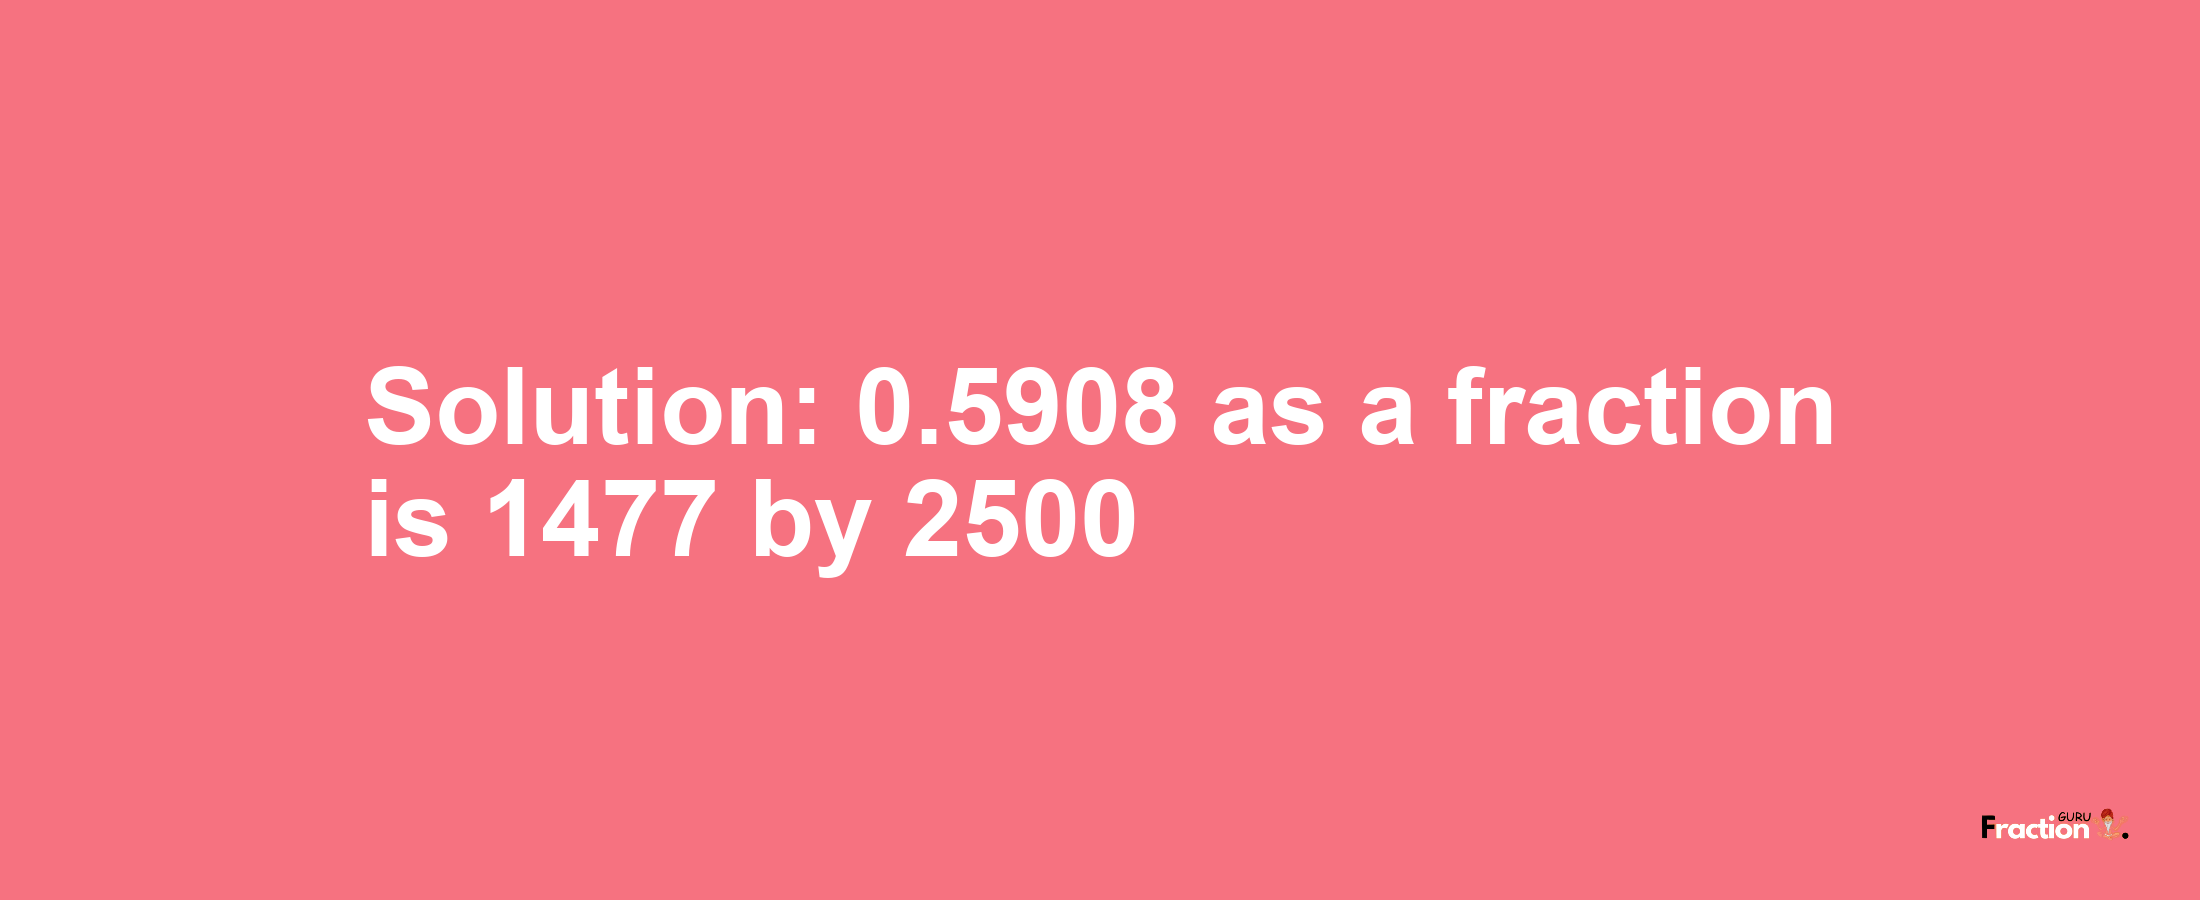 Solution:0.5908 as a fraction is 1477/2500